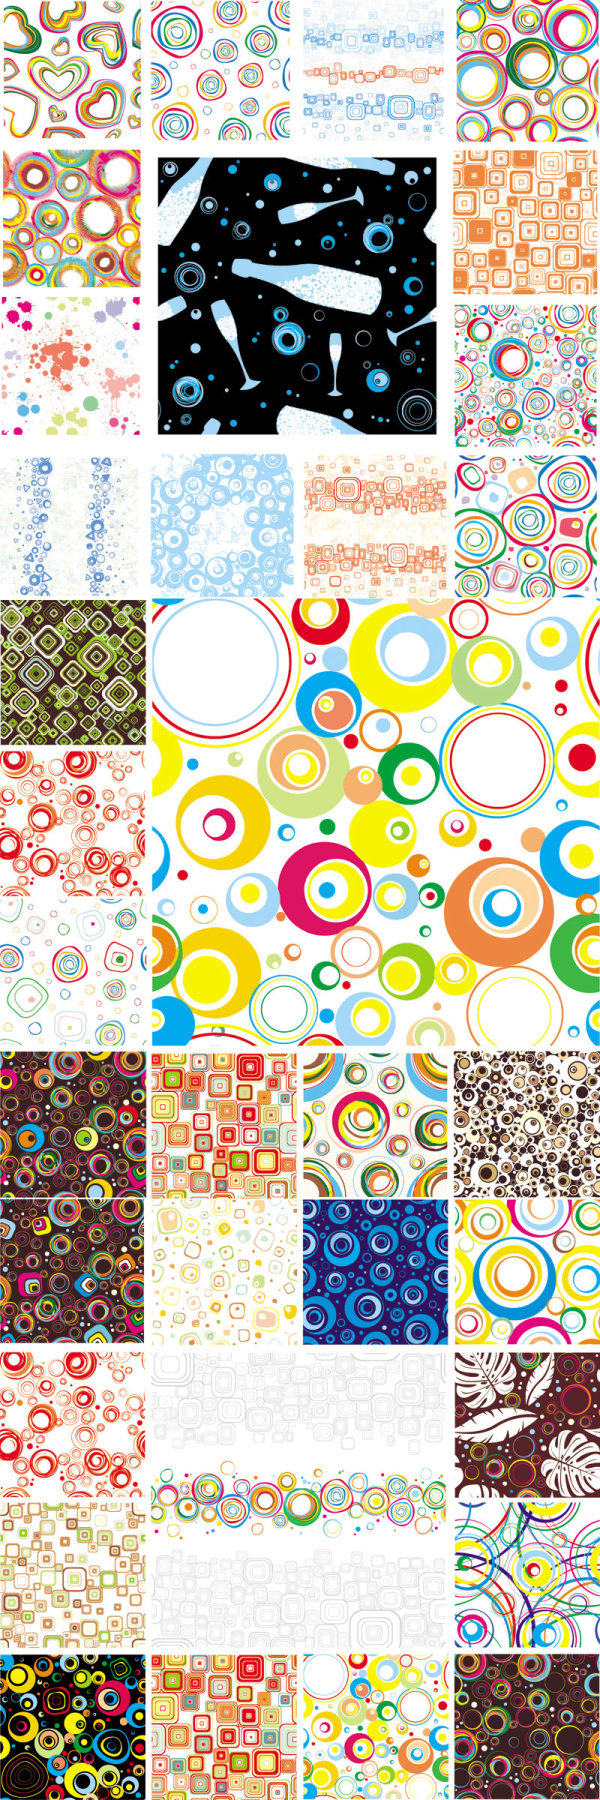 colorful pattern background design vector